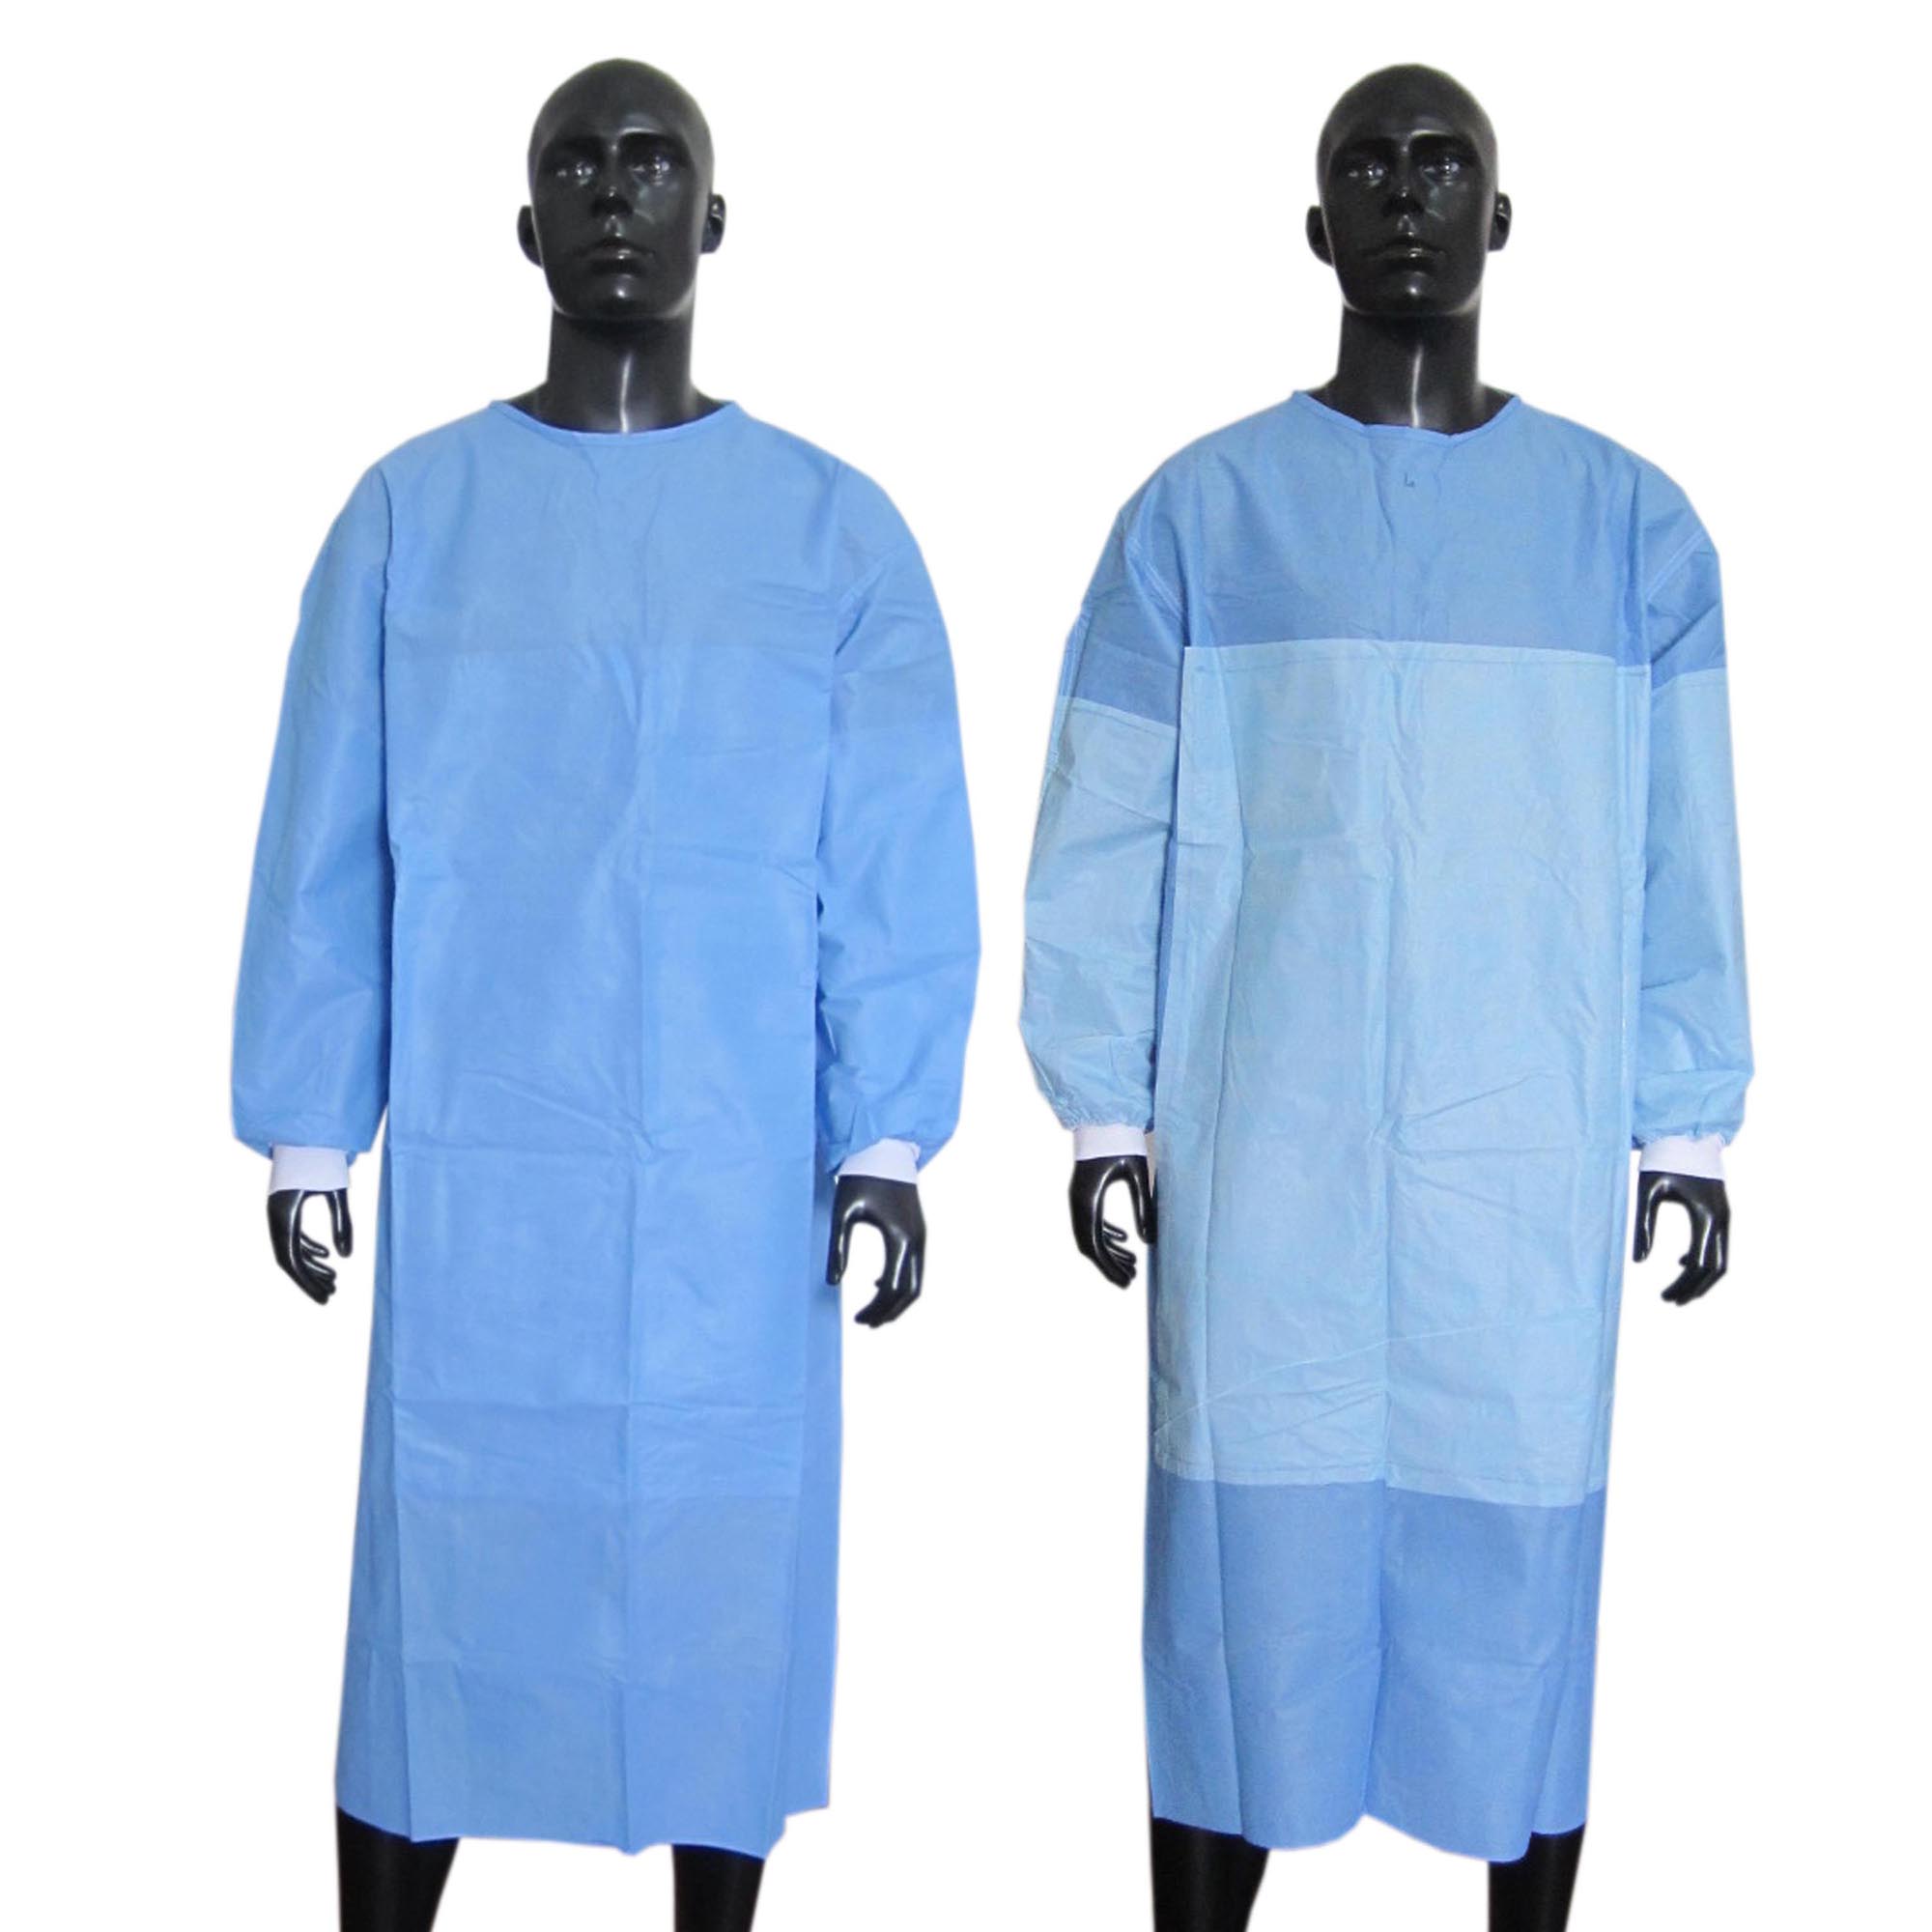 Enlarge Size Disposable Reinforced Surgical Gown